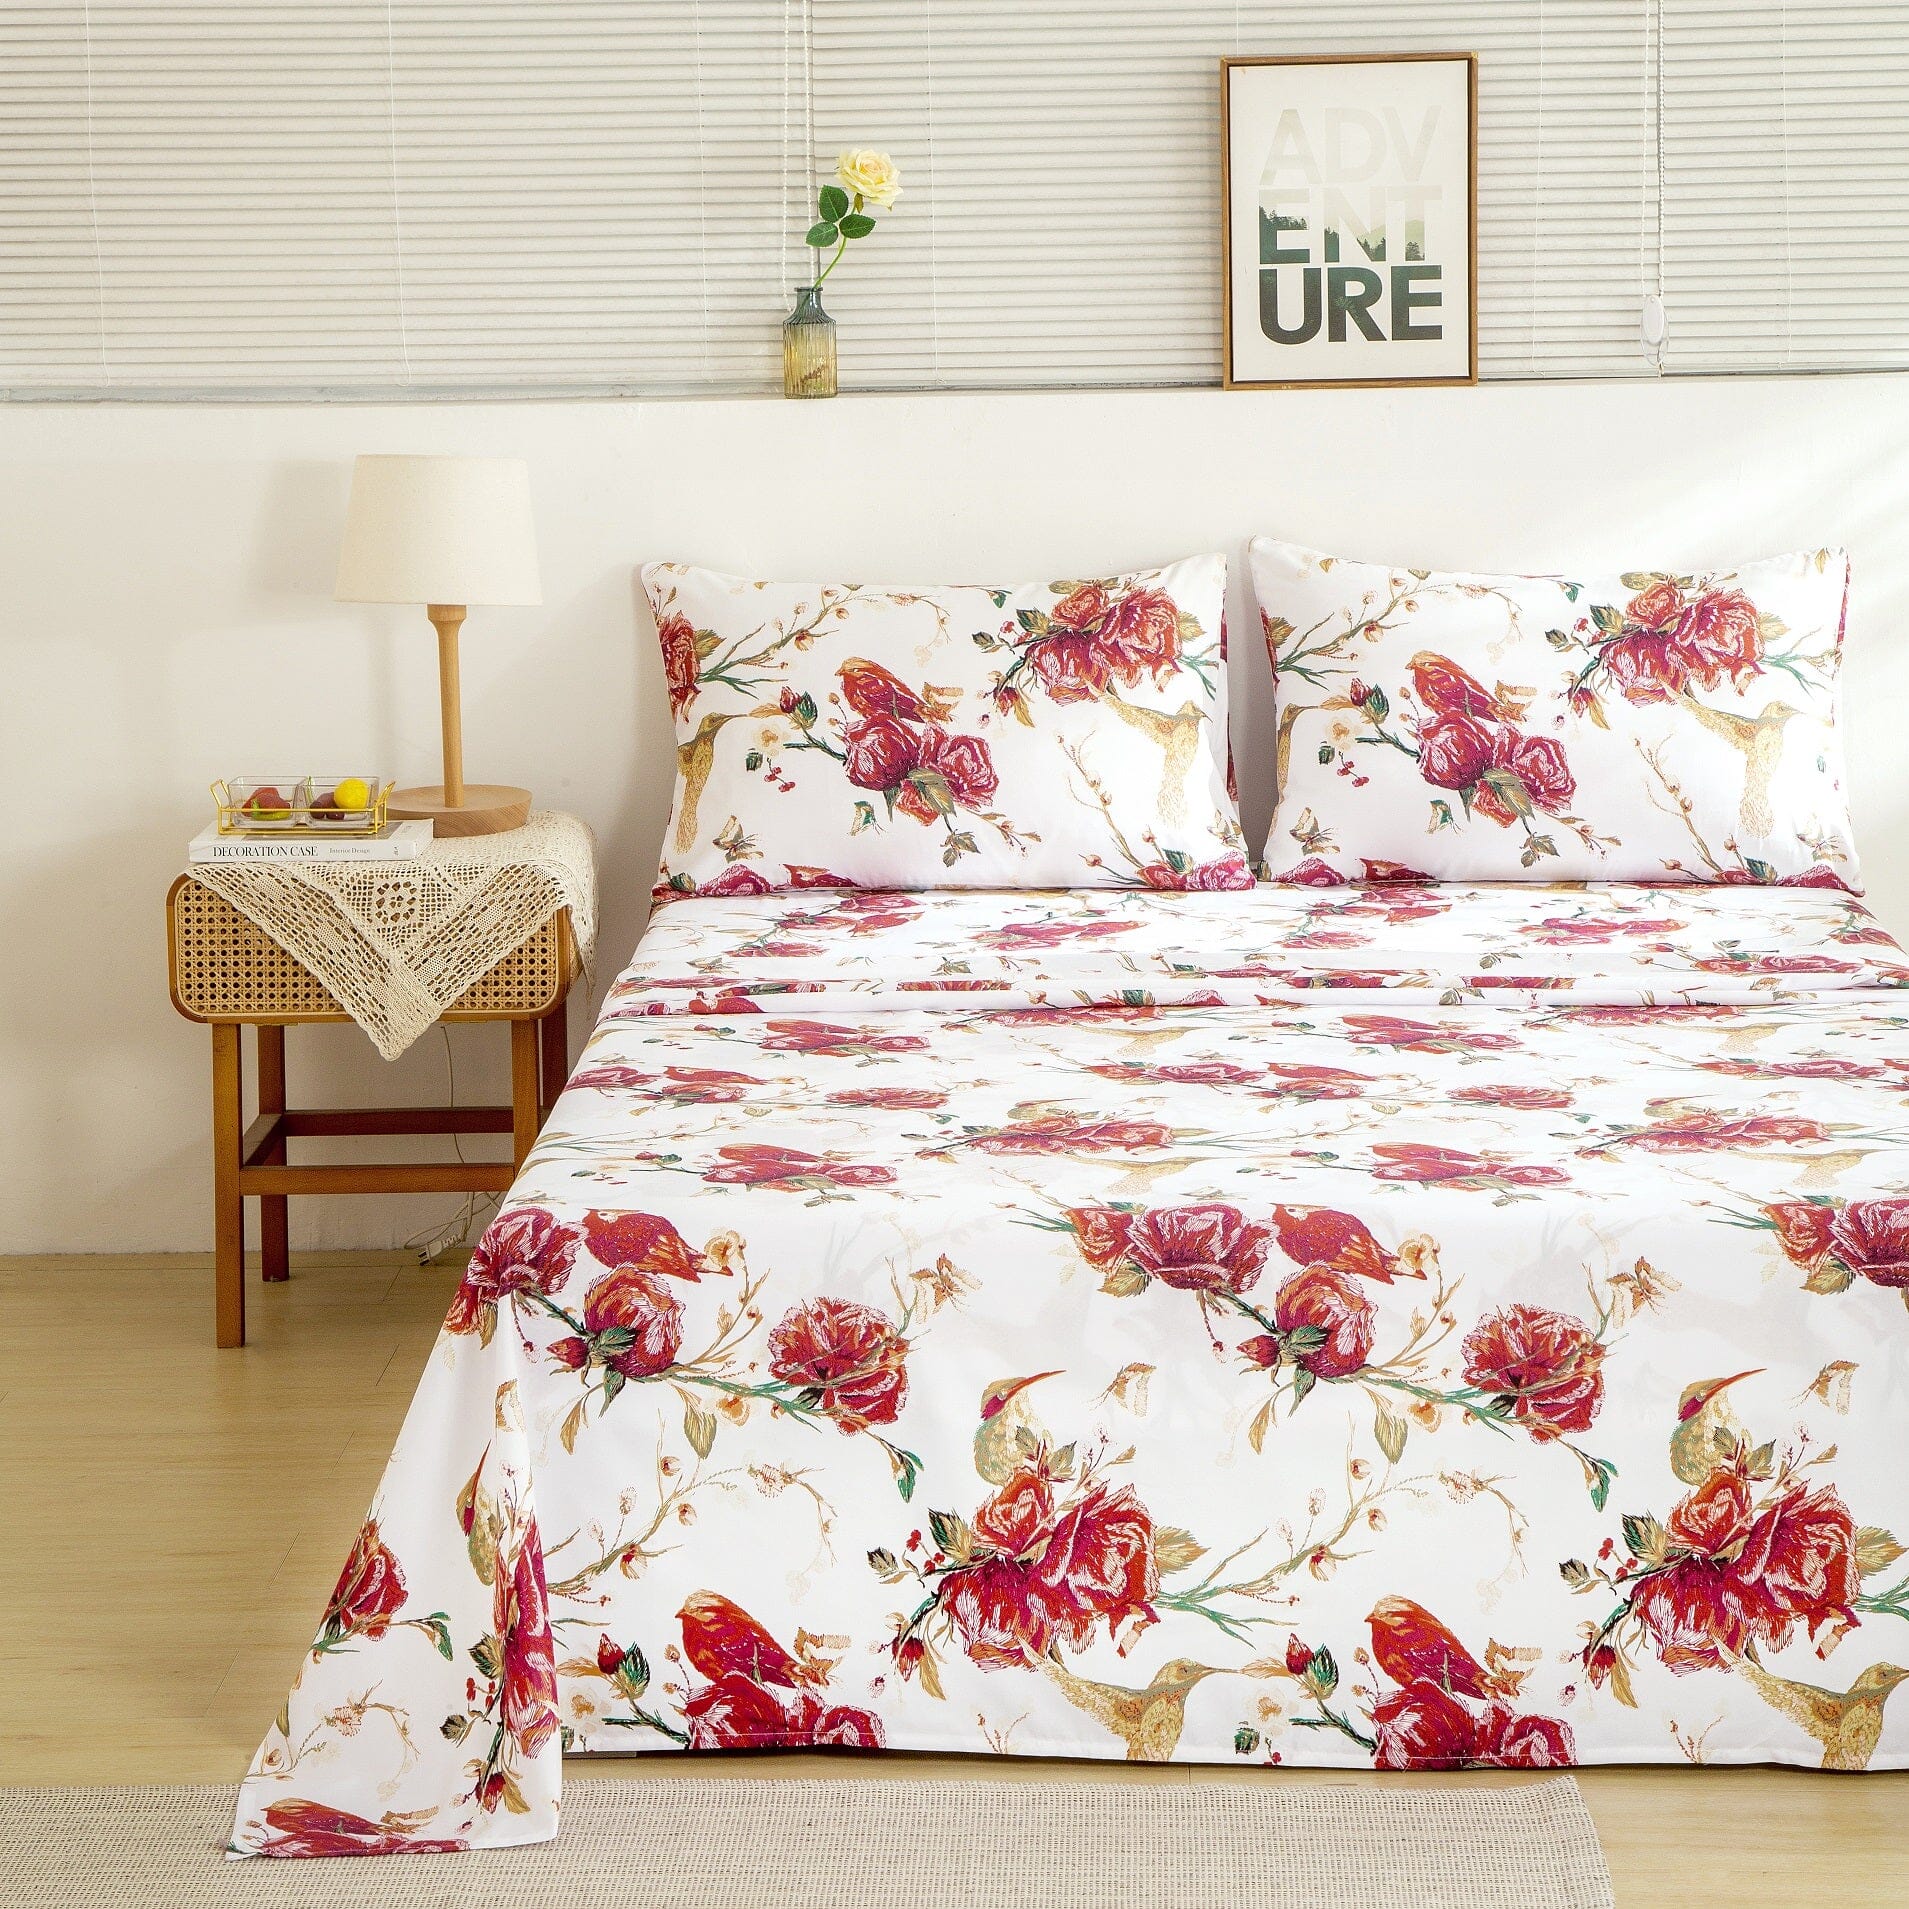 Floral Red Roses Shabby Chic Country Cottage Bed Sheet Set